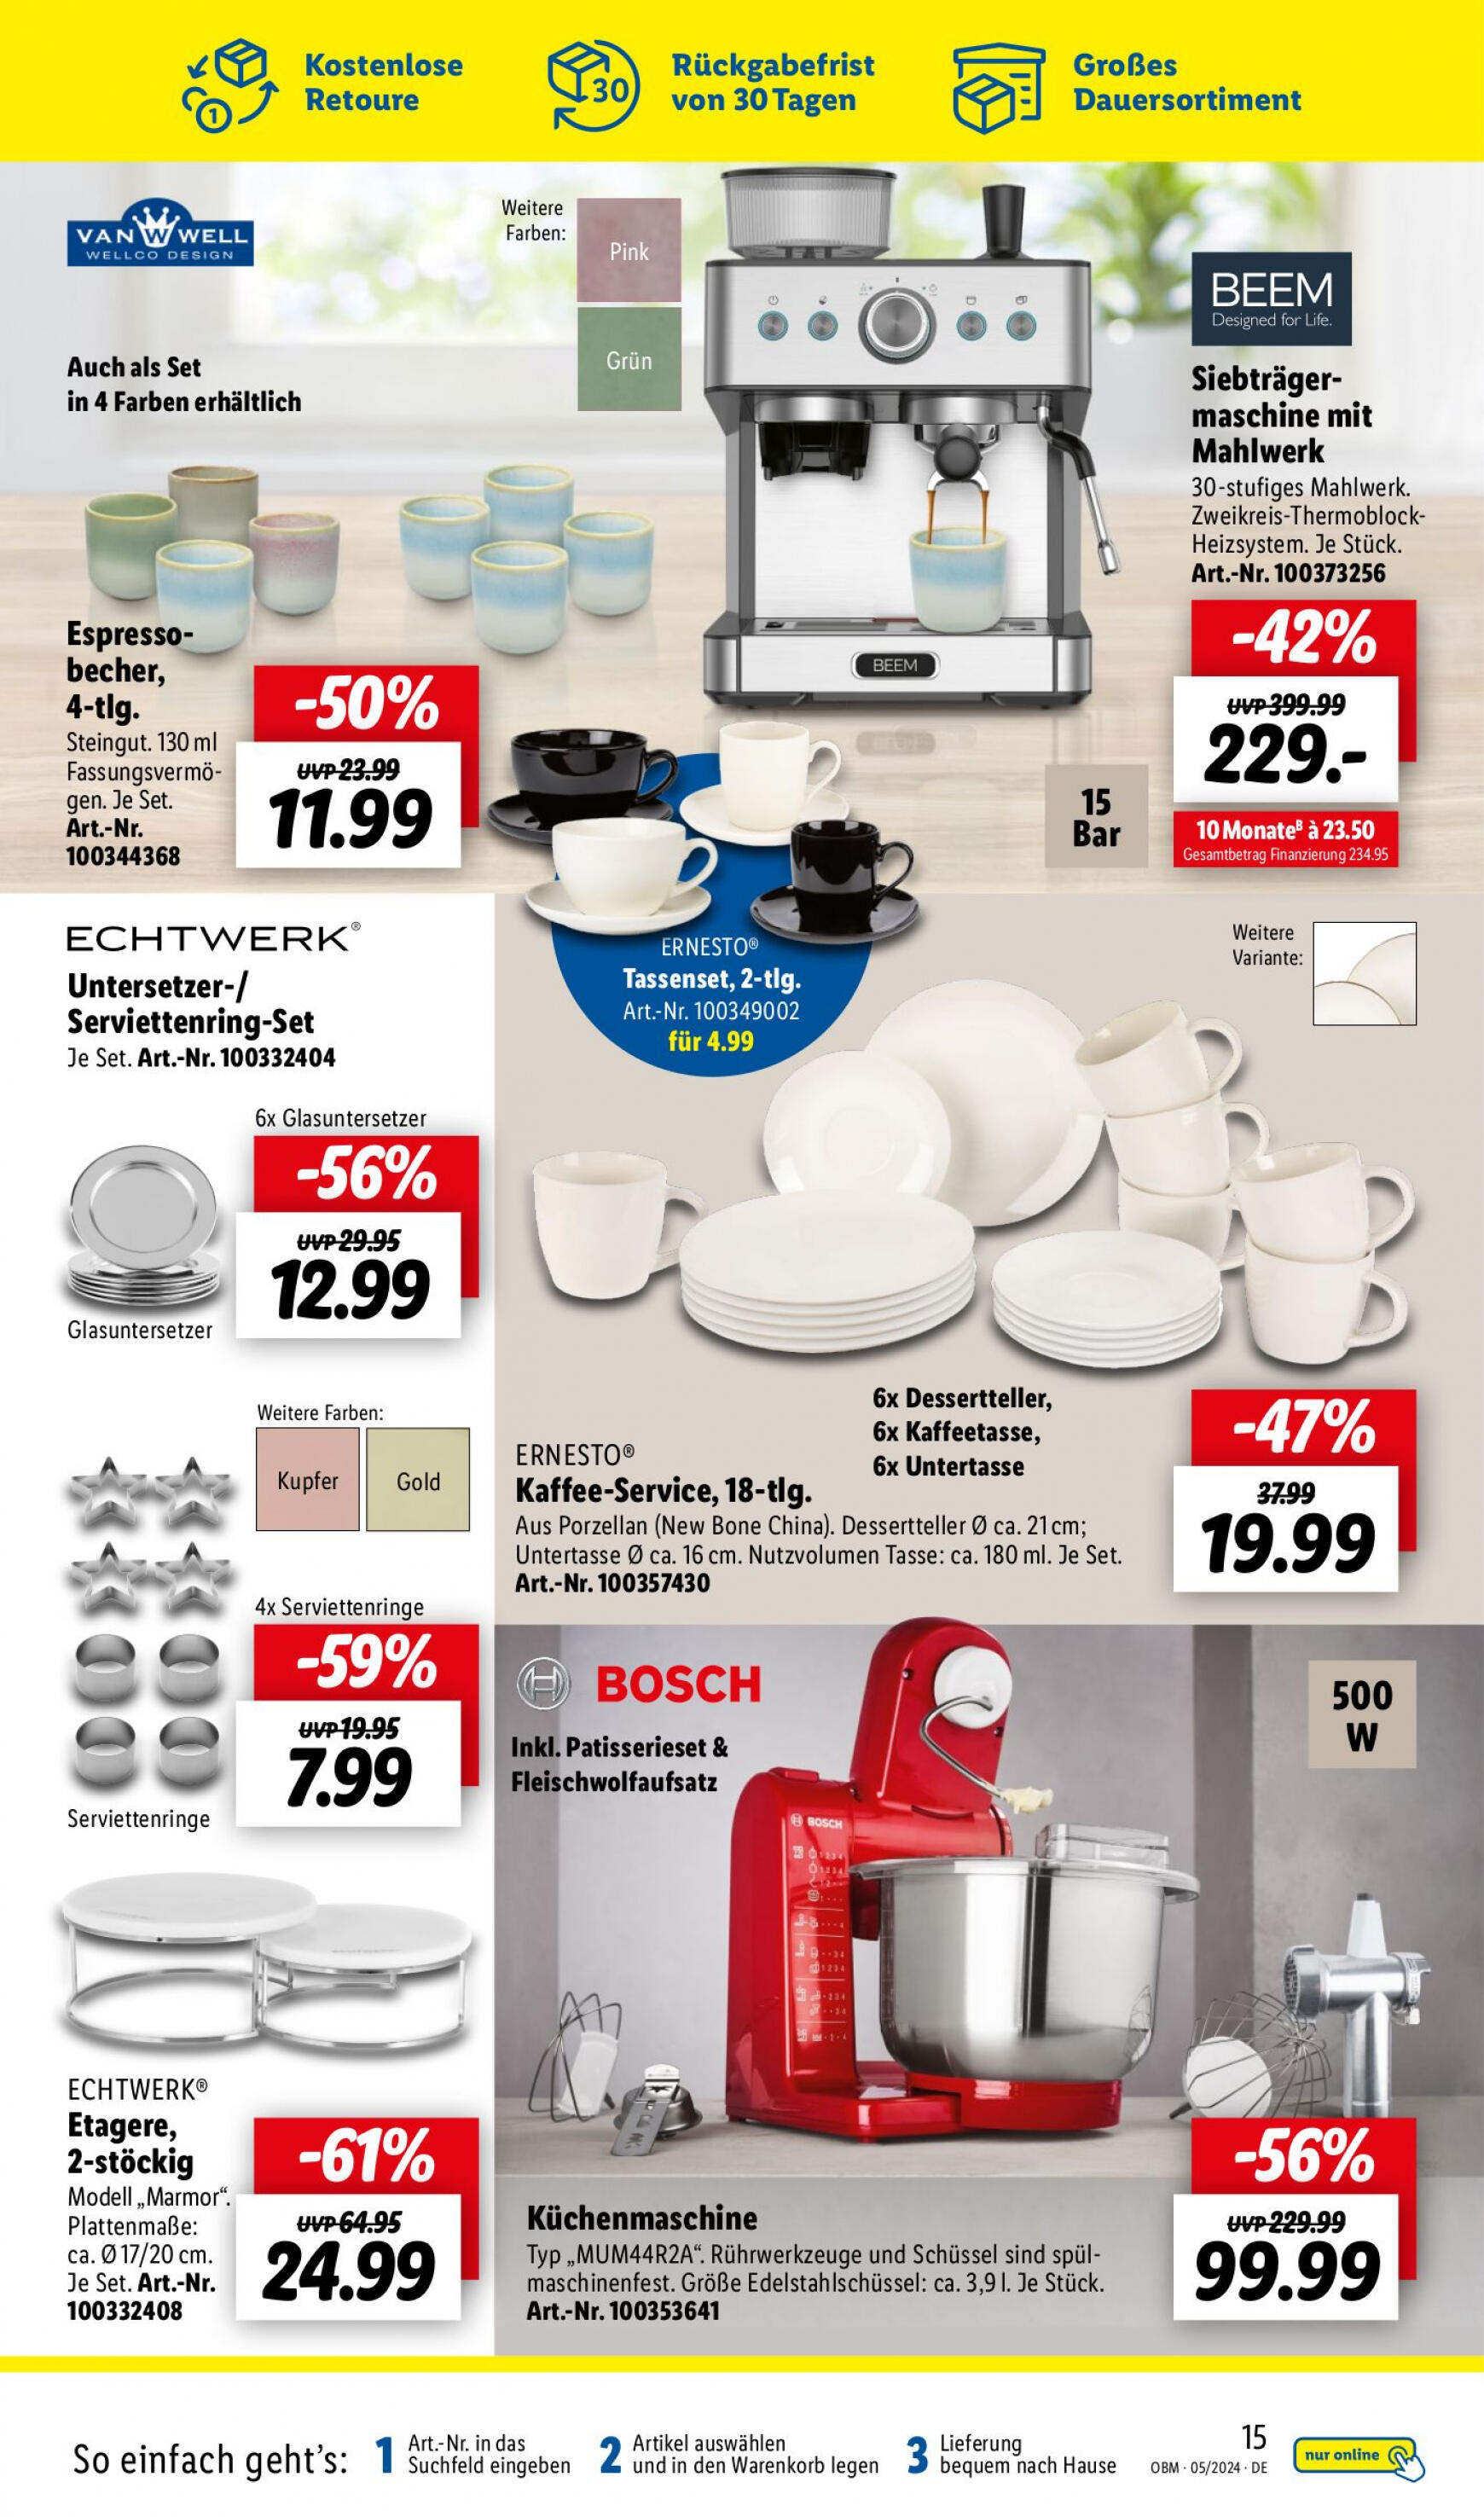 lidl - Flyer Lidl - Aktuelle Onlineshop-Highlights aktuell 01.05. - 31.05. - page: 15